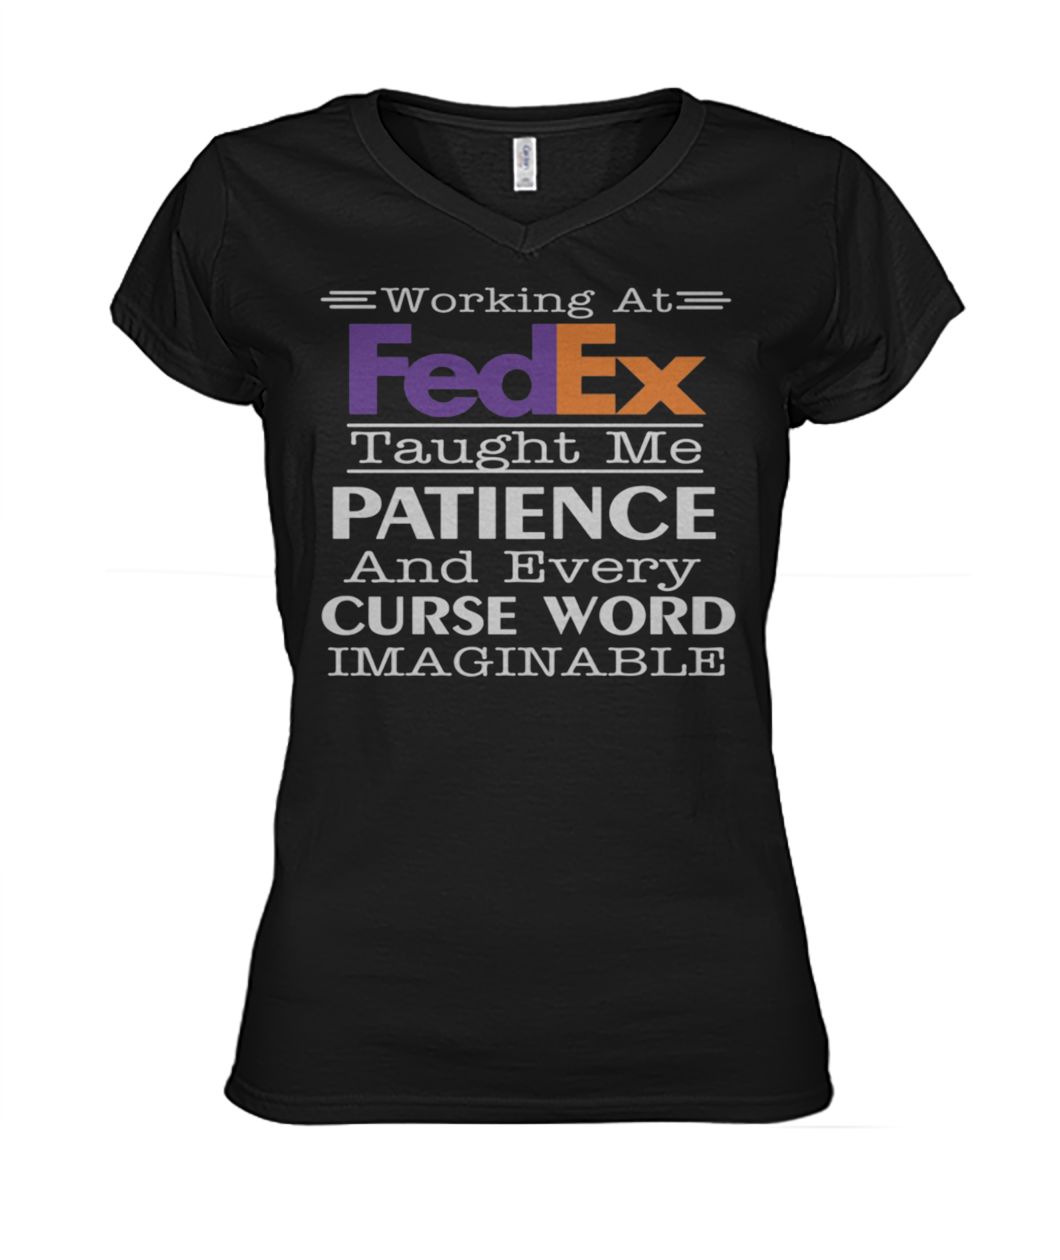 Working at fedex taught me patience and every curse word imaginable women's v-neck